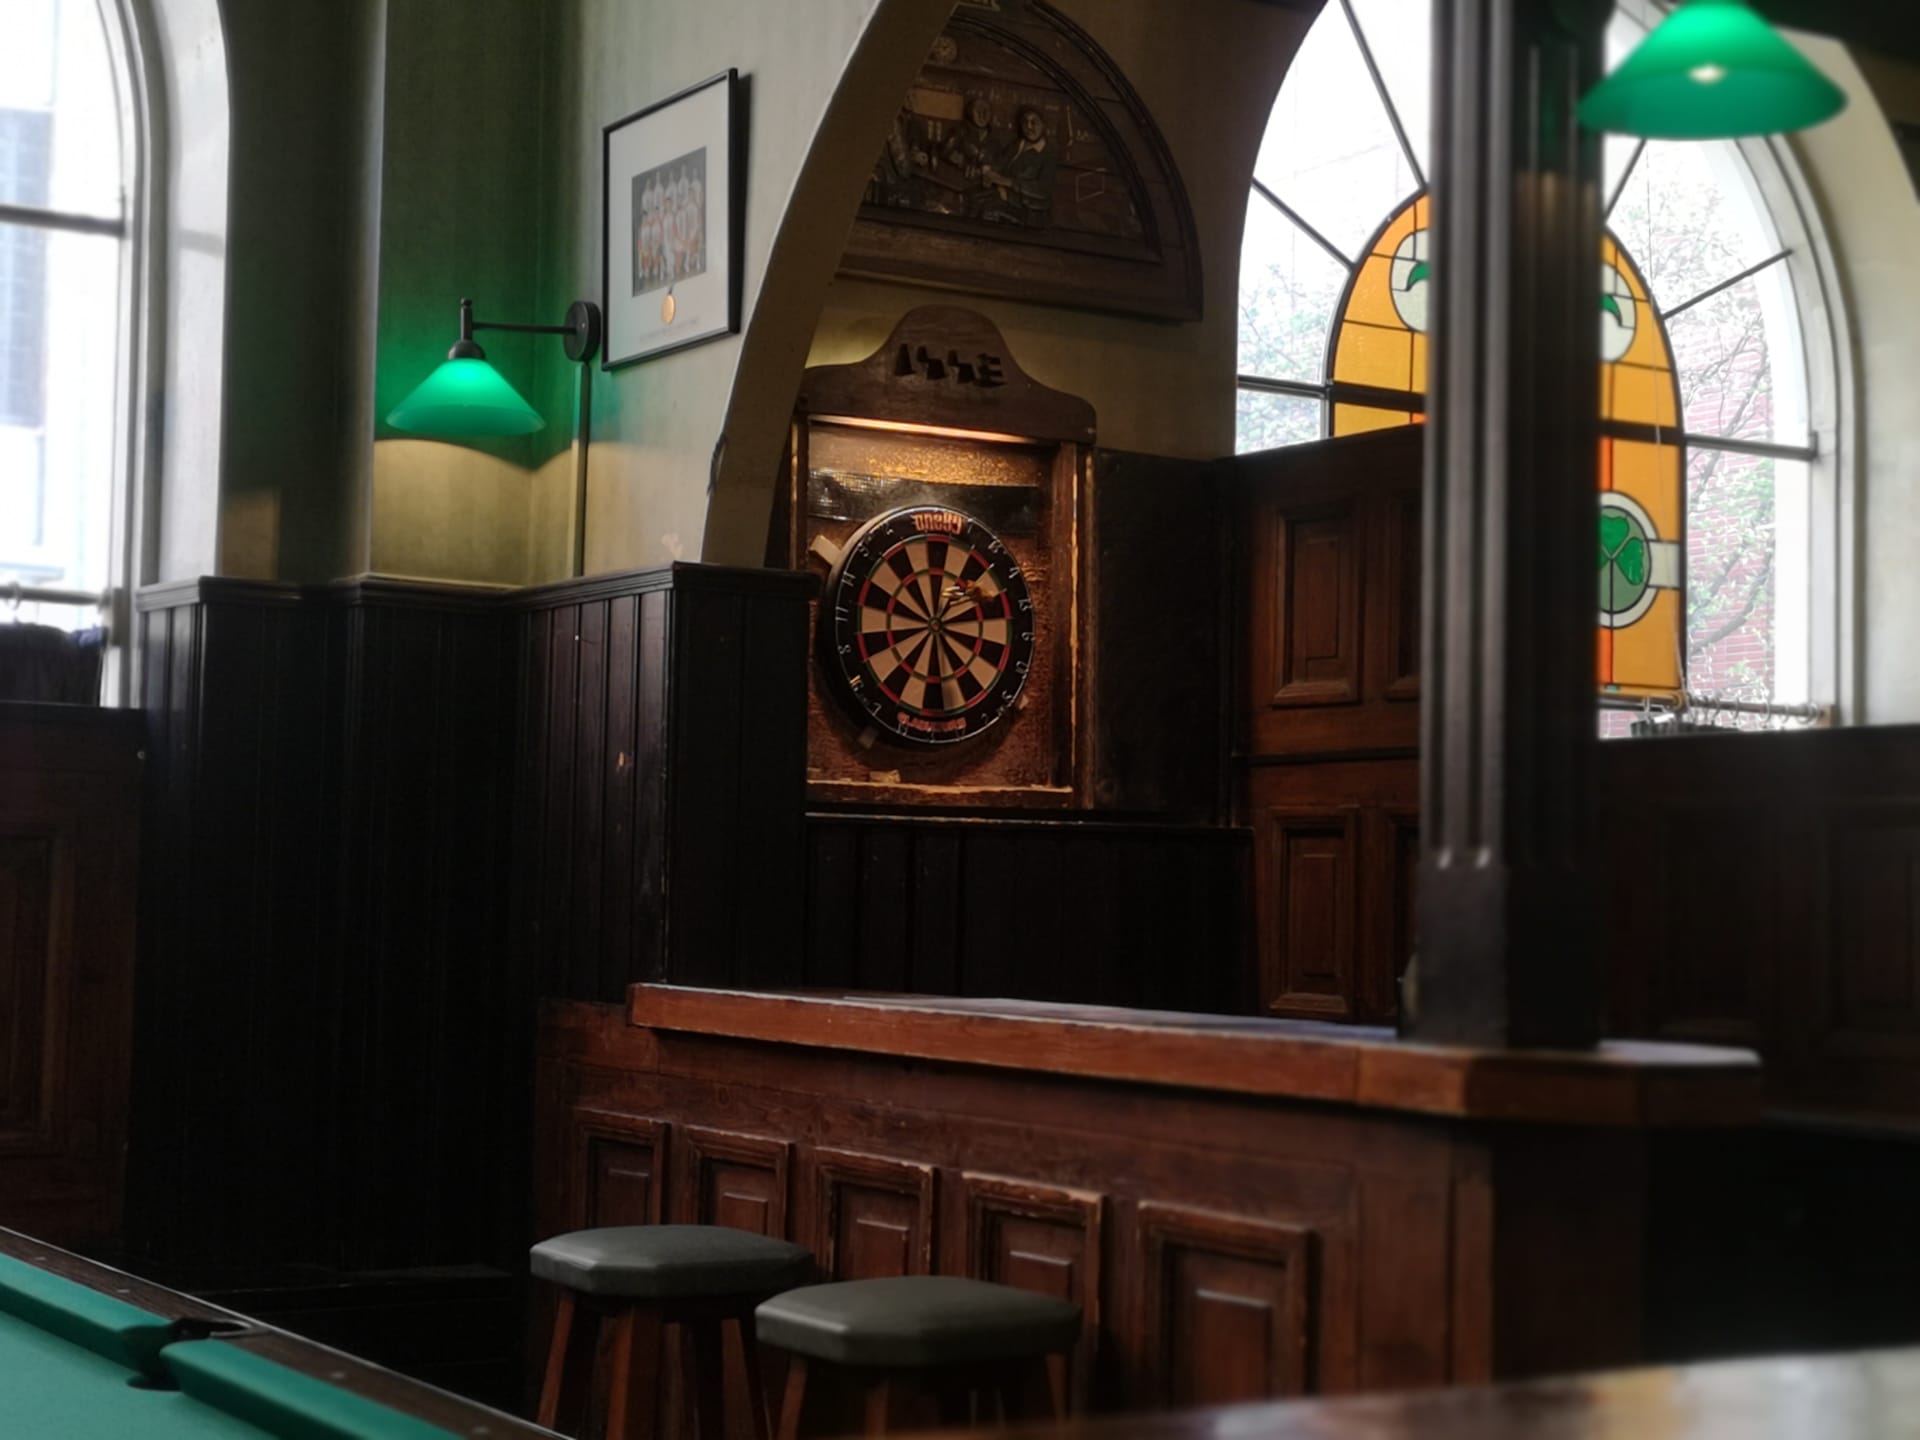 Challenge your friend to a round of Darts or Billiards